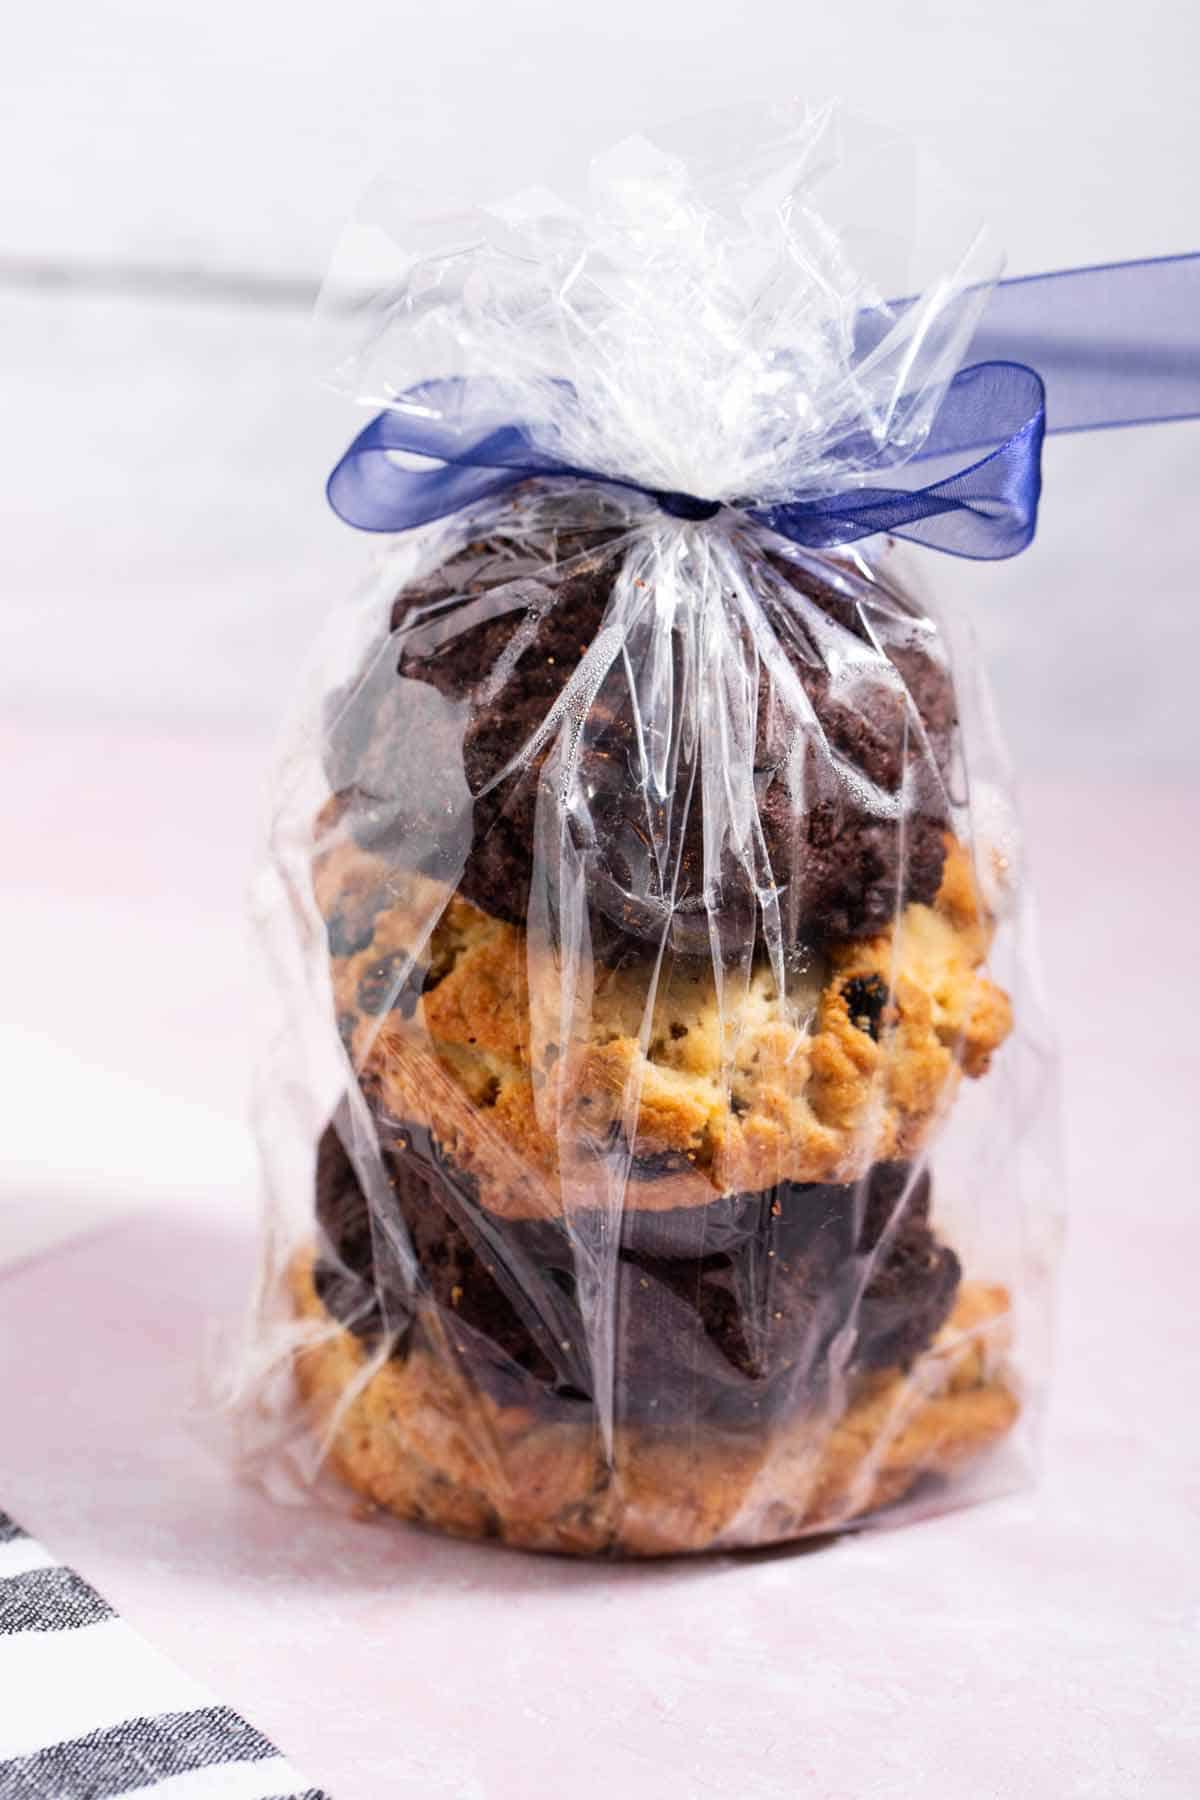 Bakery-style cookies stacked in a plastic gift bag with a ribbon.